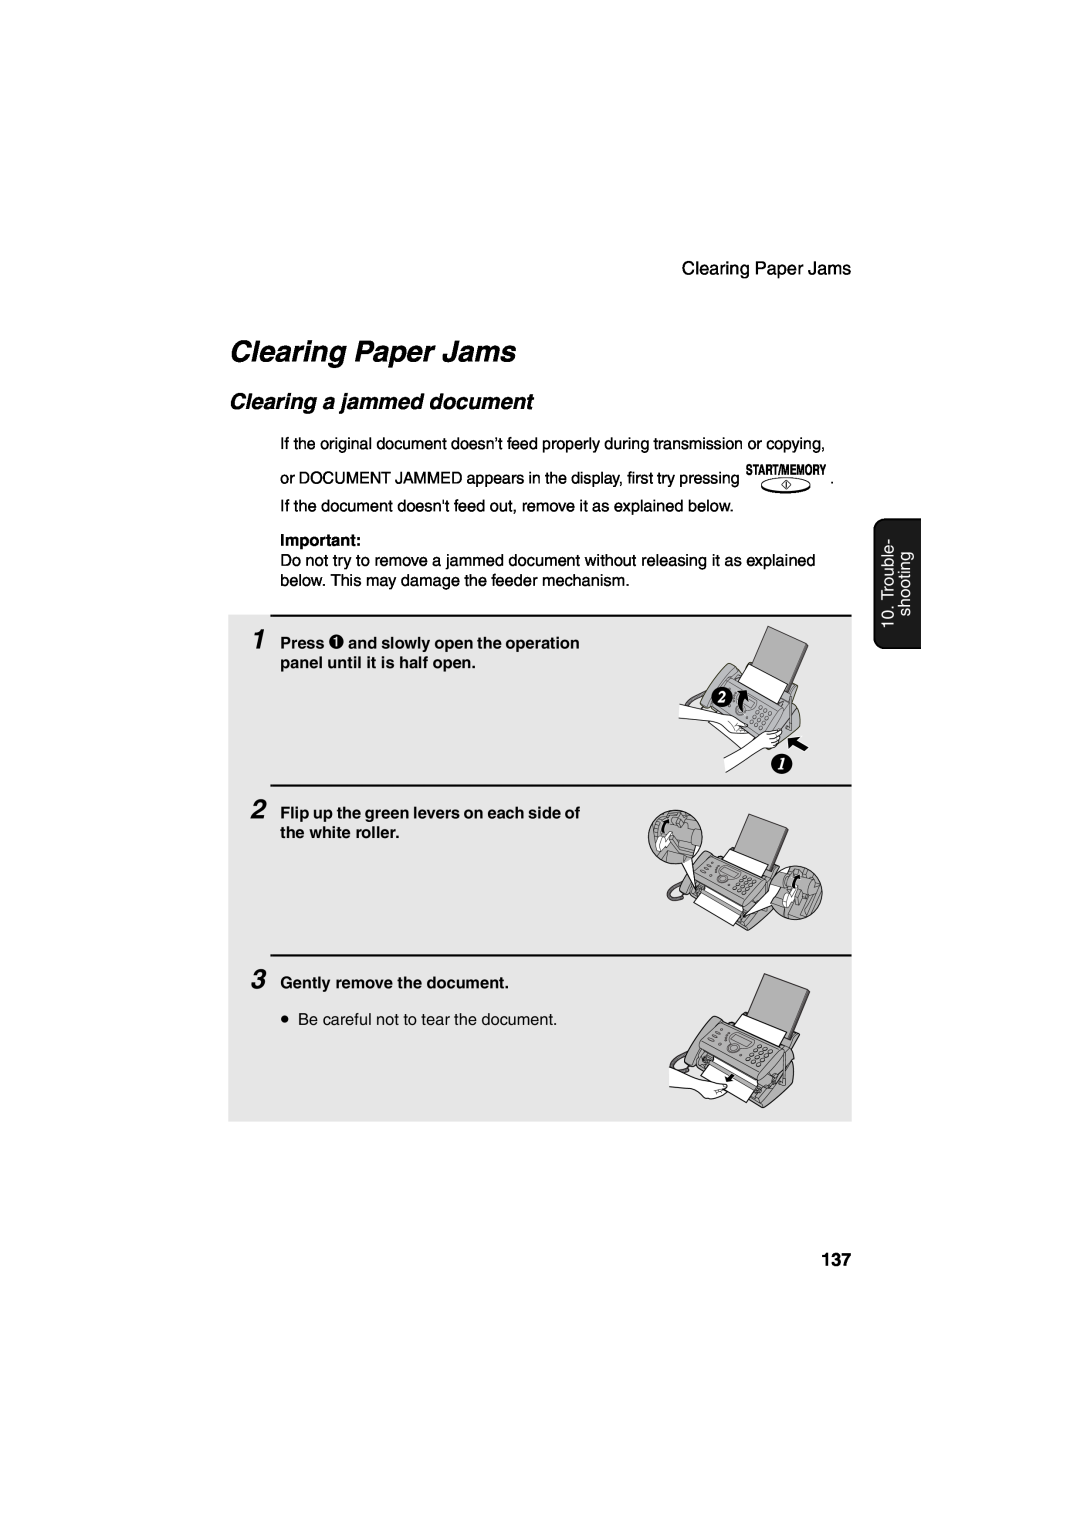 Sharp UX-CD600 operation manual Clearing Paper Jams, Clearing a jammed document, Trouble- shooting 